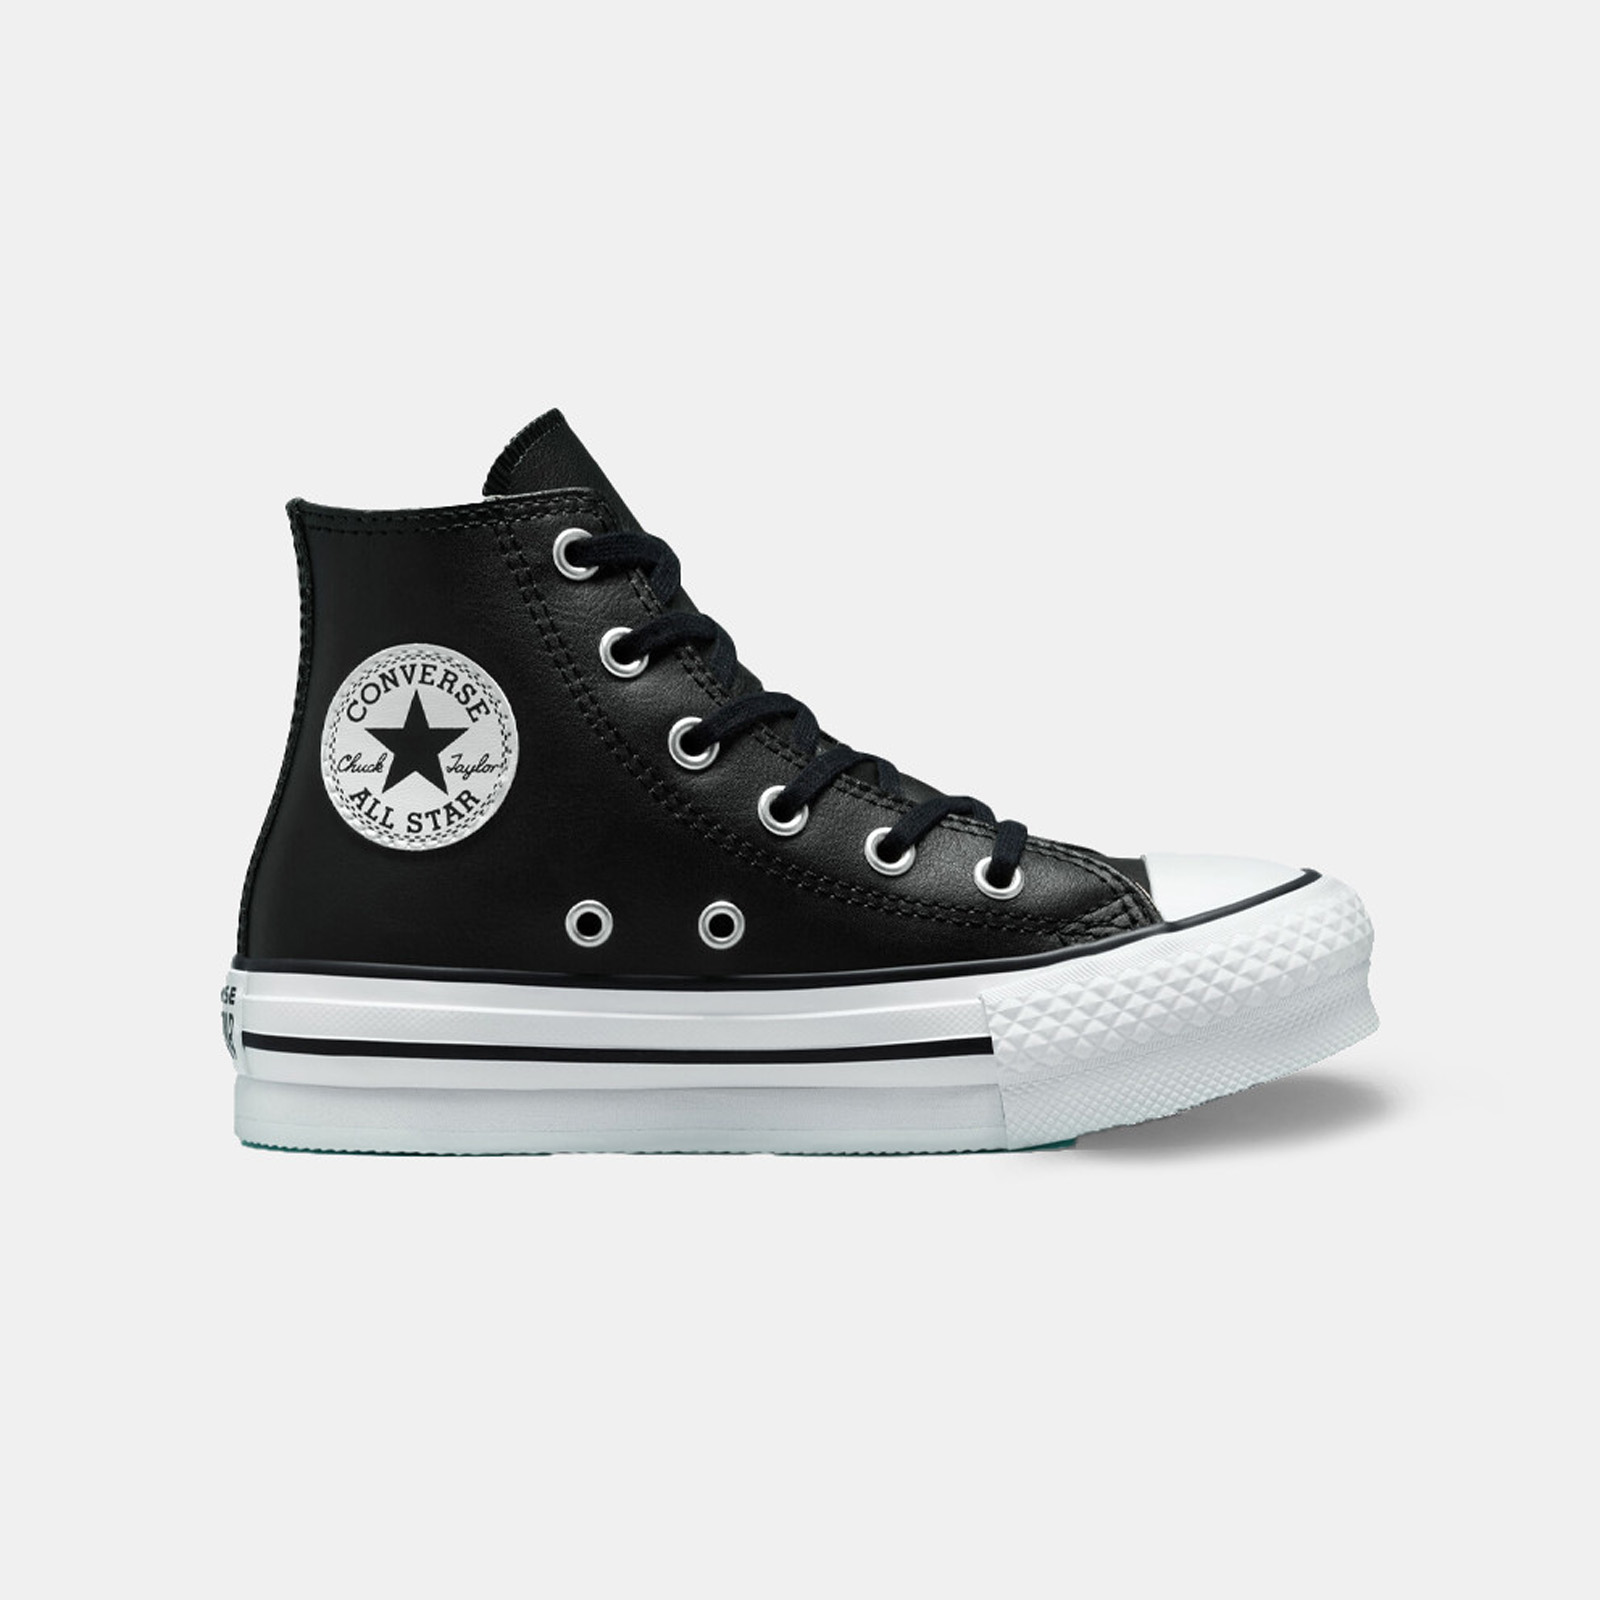 Converse - CHUCK TAYLOR ALL STAR EVA LIFT LEATHER - 001-BLACK/NATURAL IVORY/WHITE Παιδικά > Παπούτσια > Sneaker > Μποτάκι High Cut